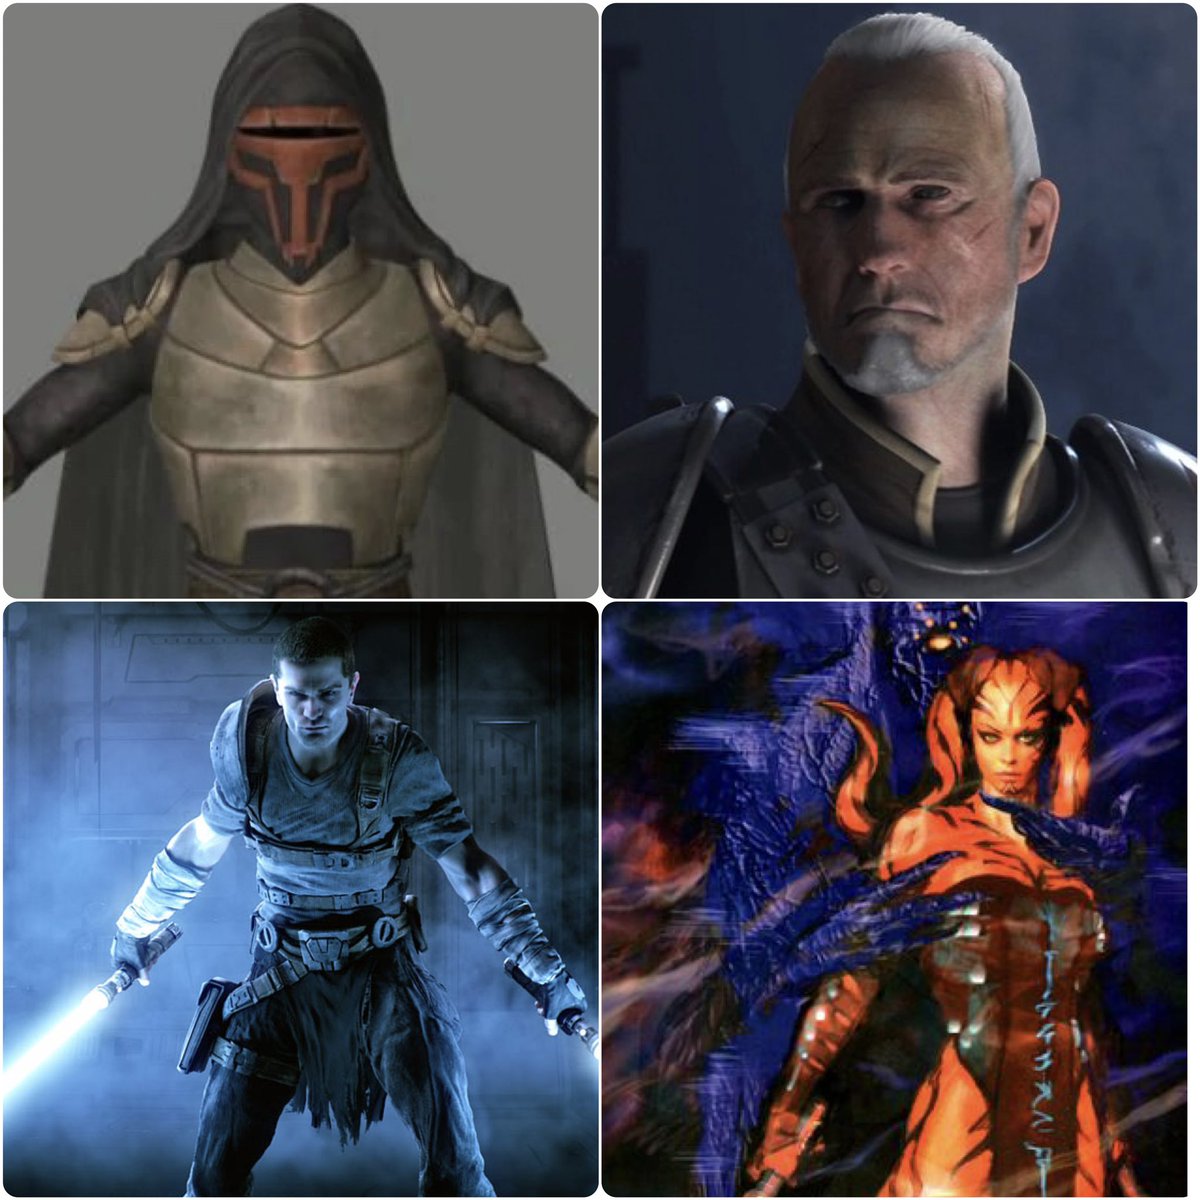 Here are stuff from the Star Wars Legends that was almost made it onscreen in a movie/show 
-Yuuzhan Vong could’ve appeared in TCW 
-Revan almost was in Mortis Arc 
-Rahm Kota was in Rogue One early drafts 
-Starkiller was considered for Rebels 
-Darth Talon was in Lucas ST